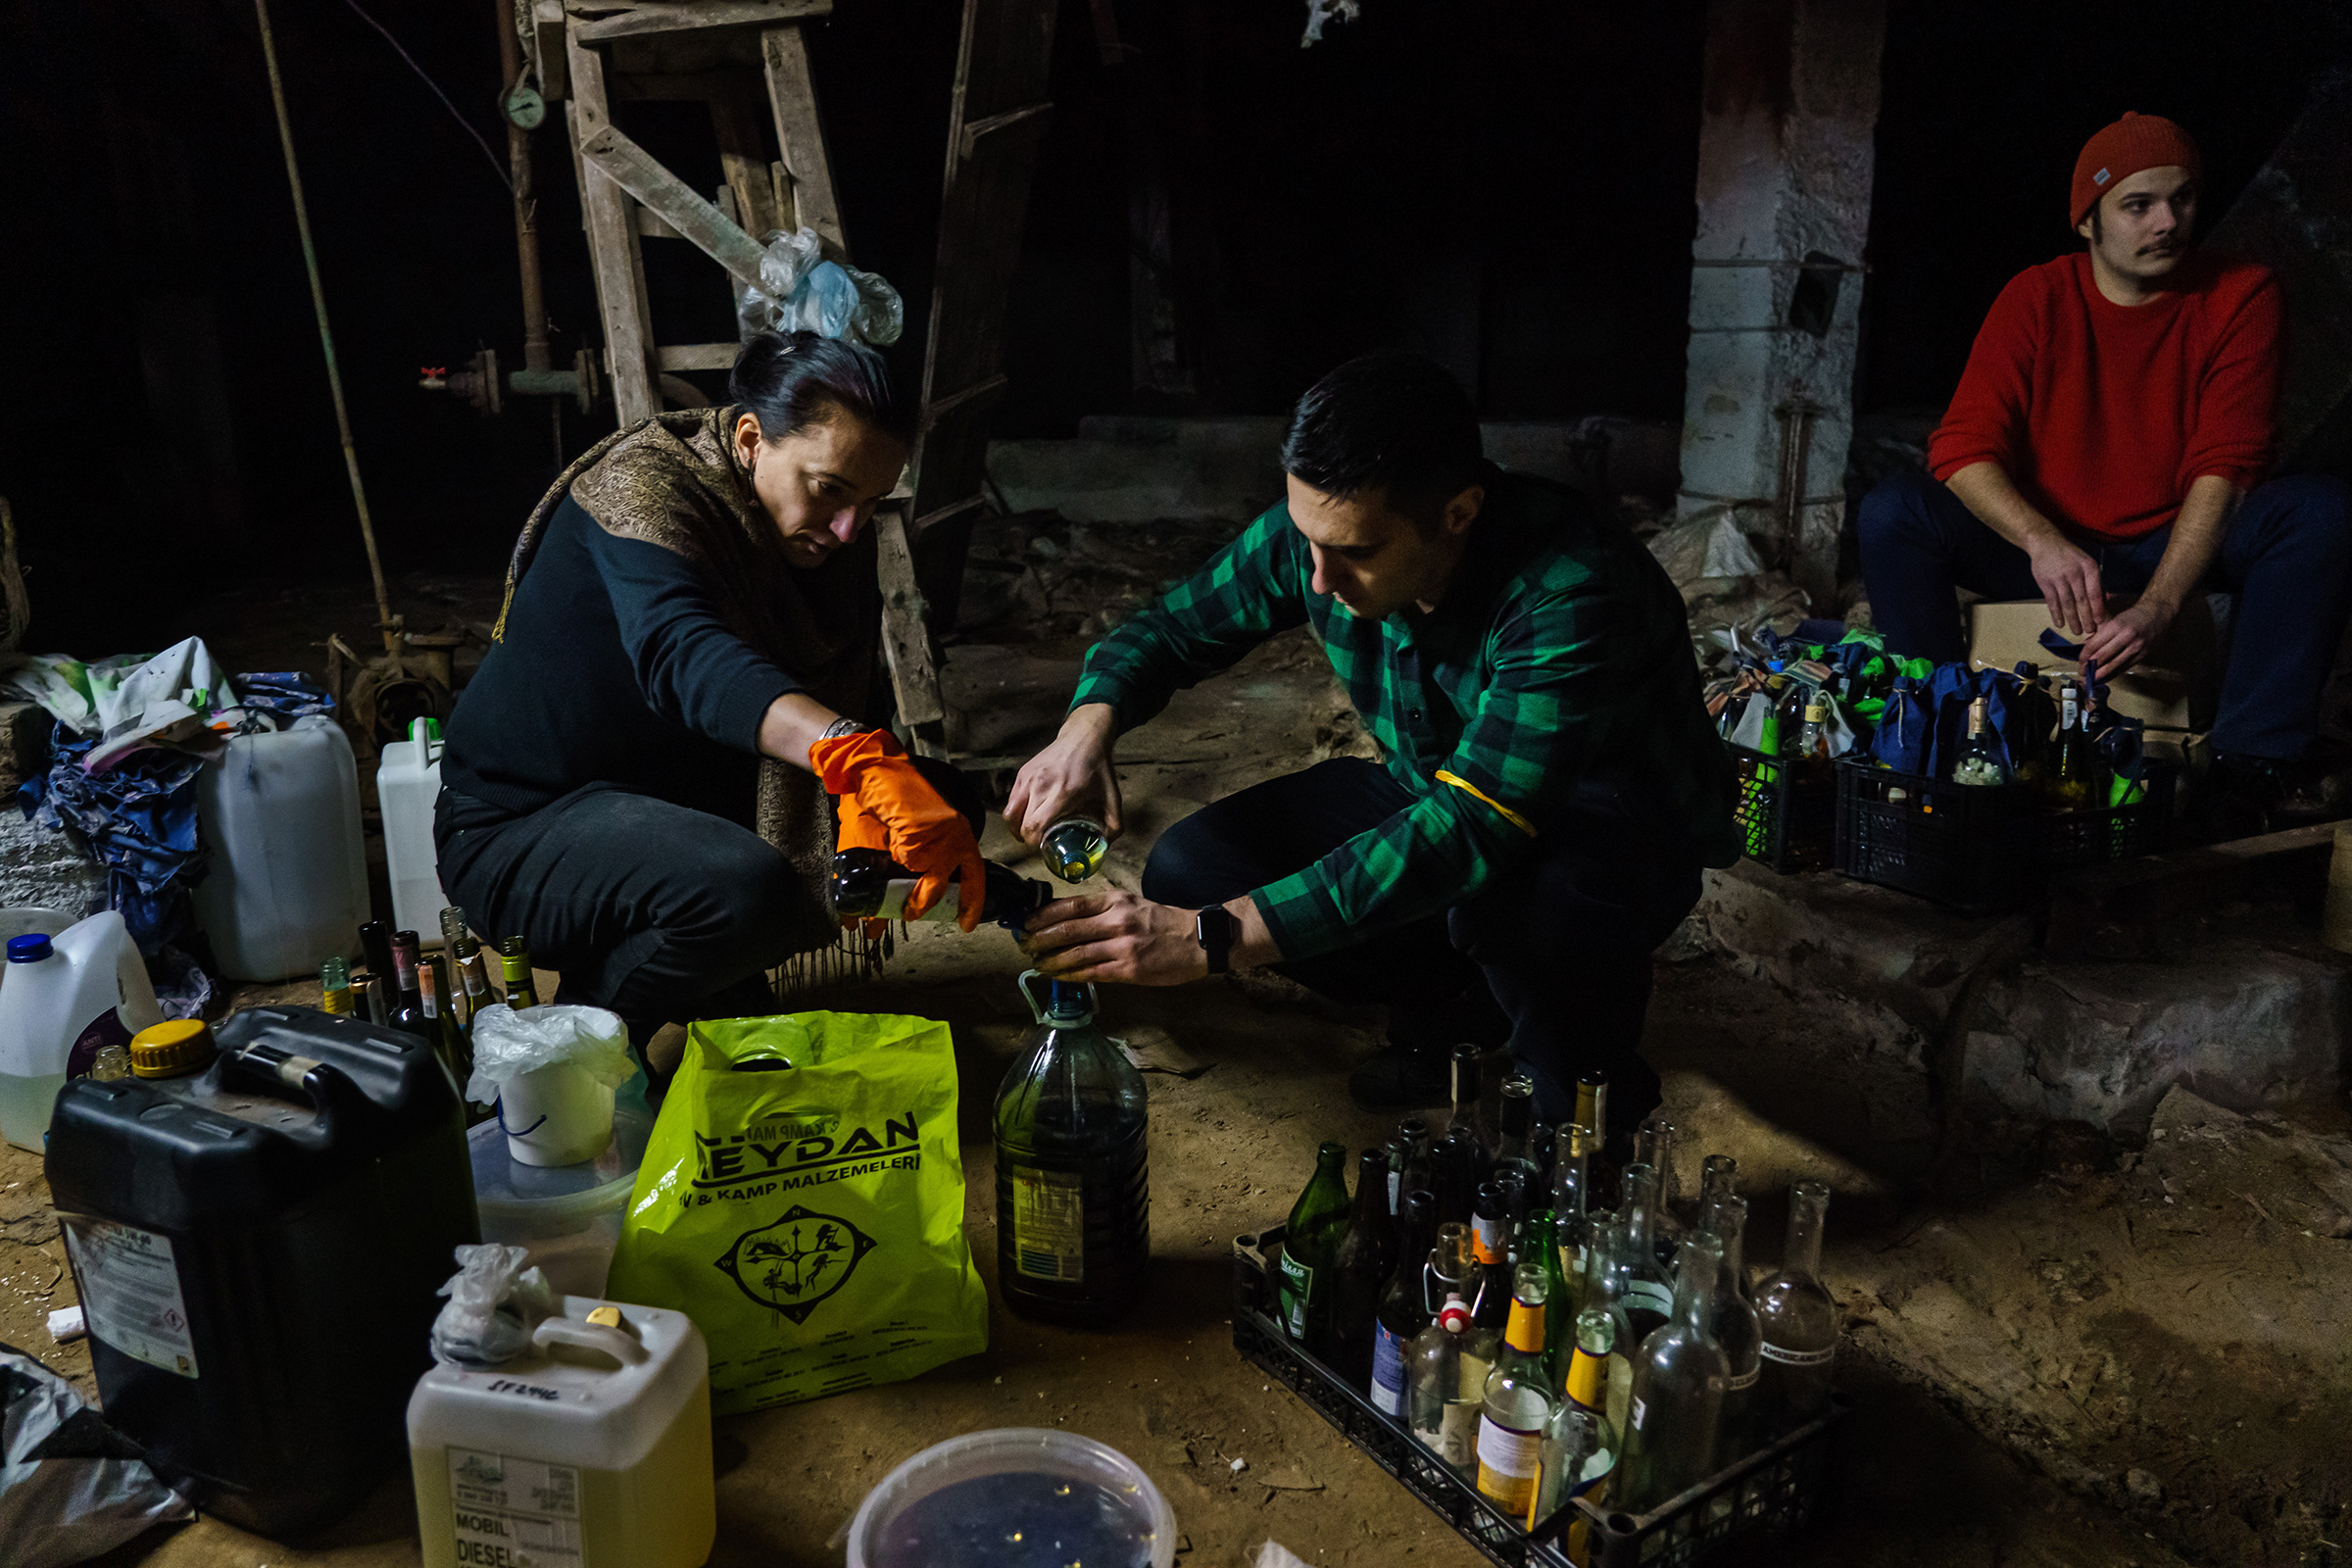 Volunteers from the Territorial Defense Force make Molotov cocktails to use against the invading Russian troops in Kyiv Feb. 26 (Marcus Yam—Los Angeles Times/Getty Images)